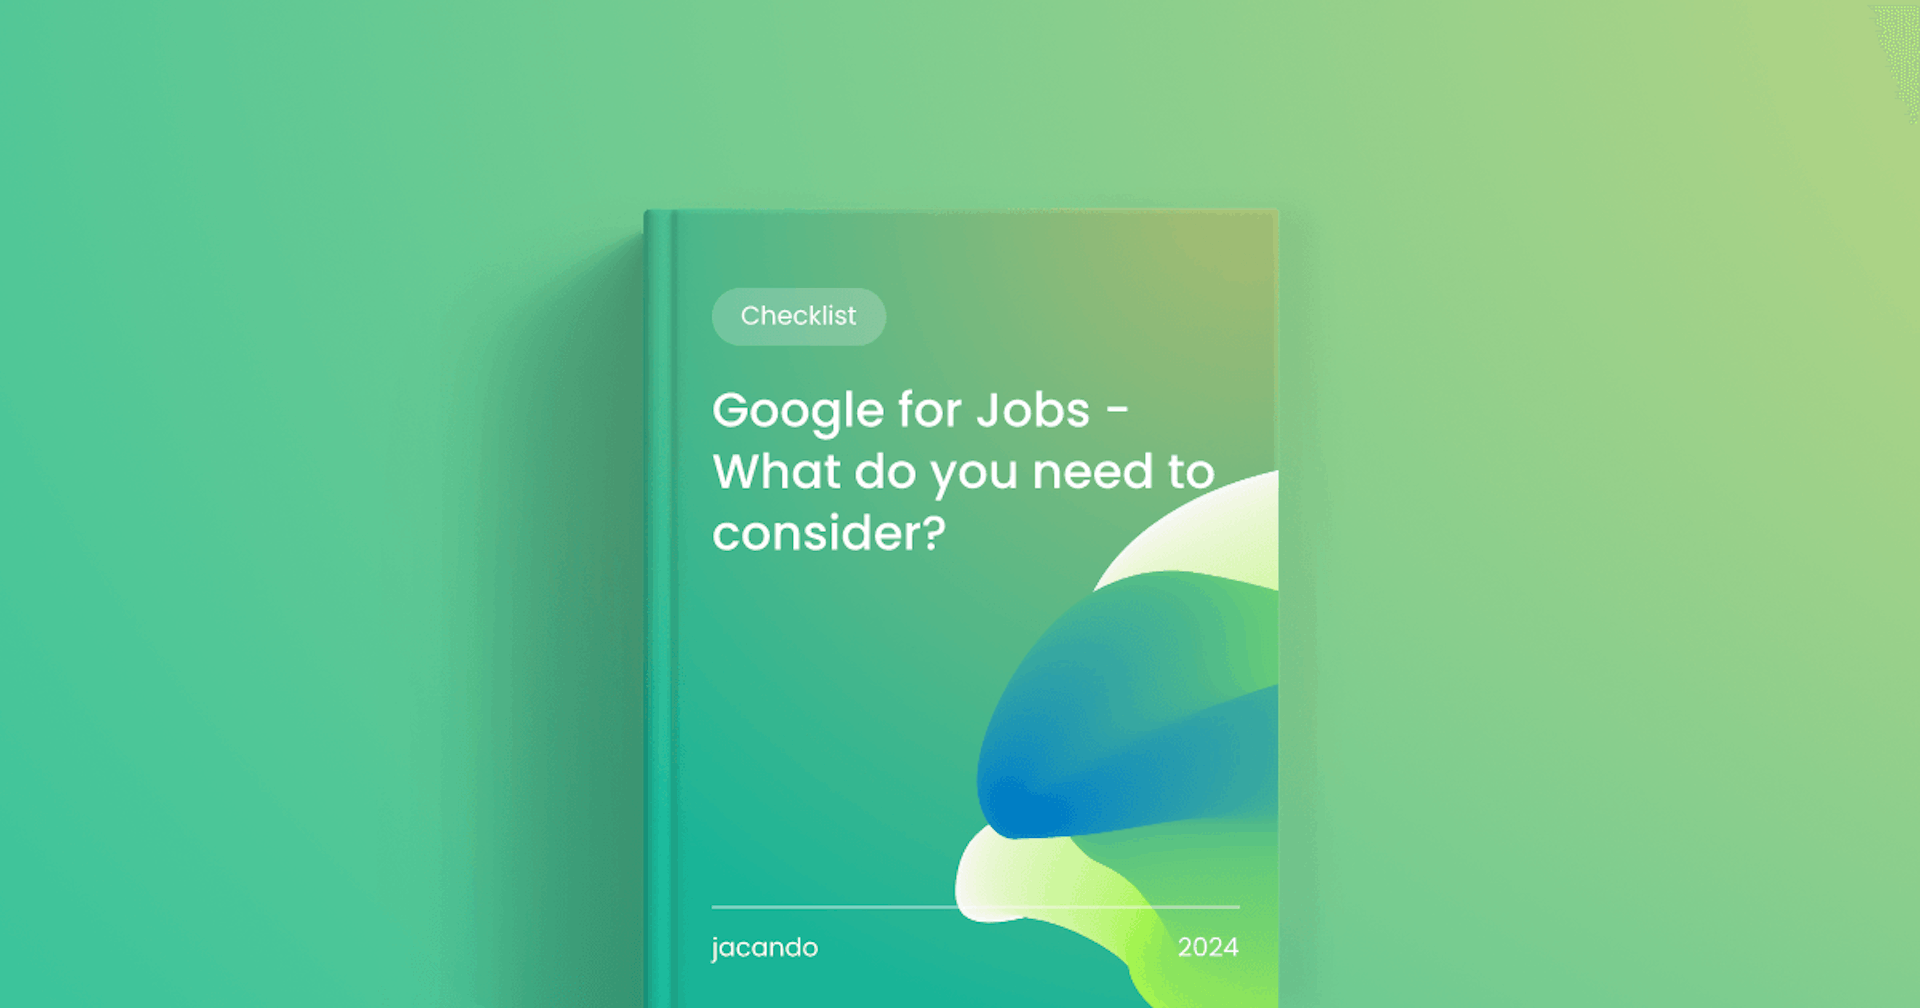 Google for Jobs - What do you need to consider?